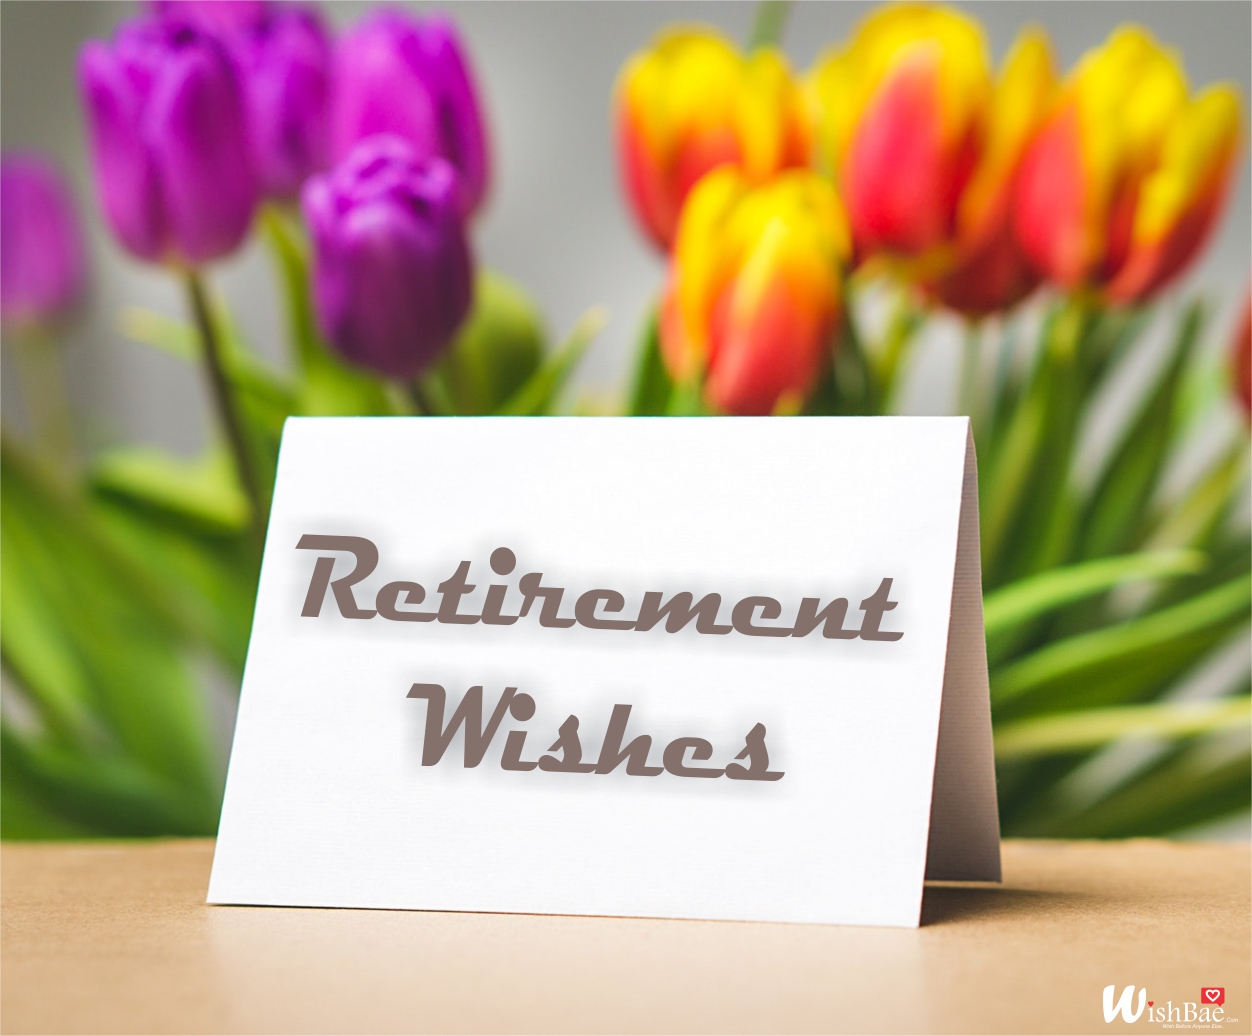 Retirement Wishes - Happy Retirement Messages, Quotes, Sayings 2022